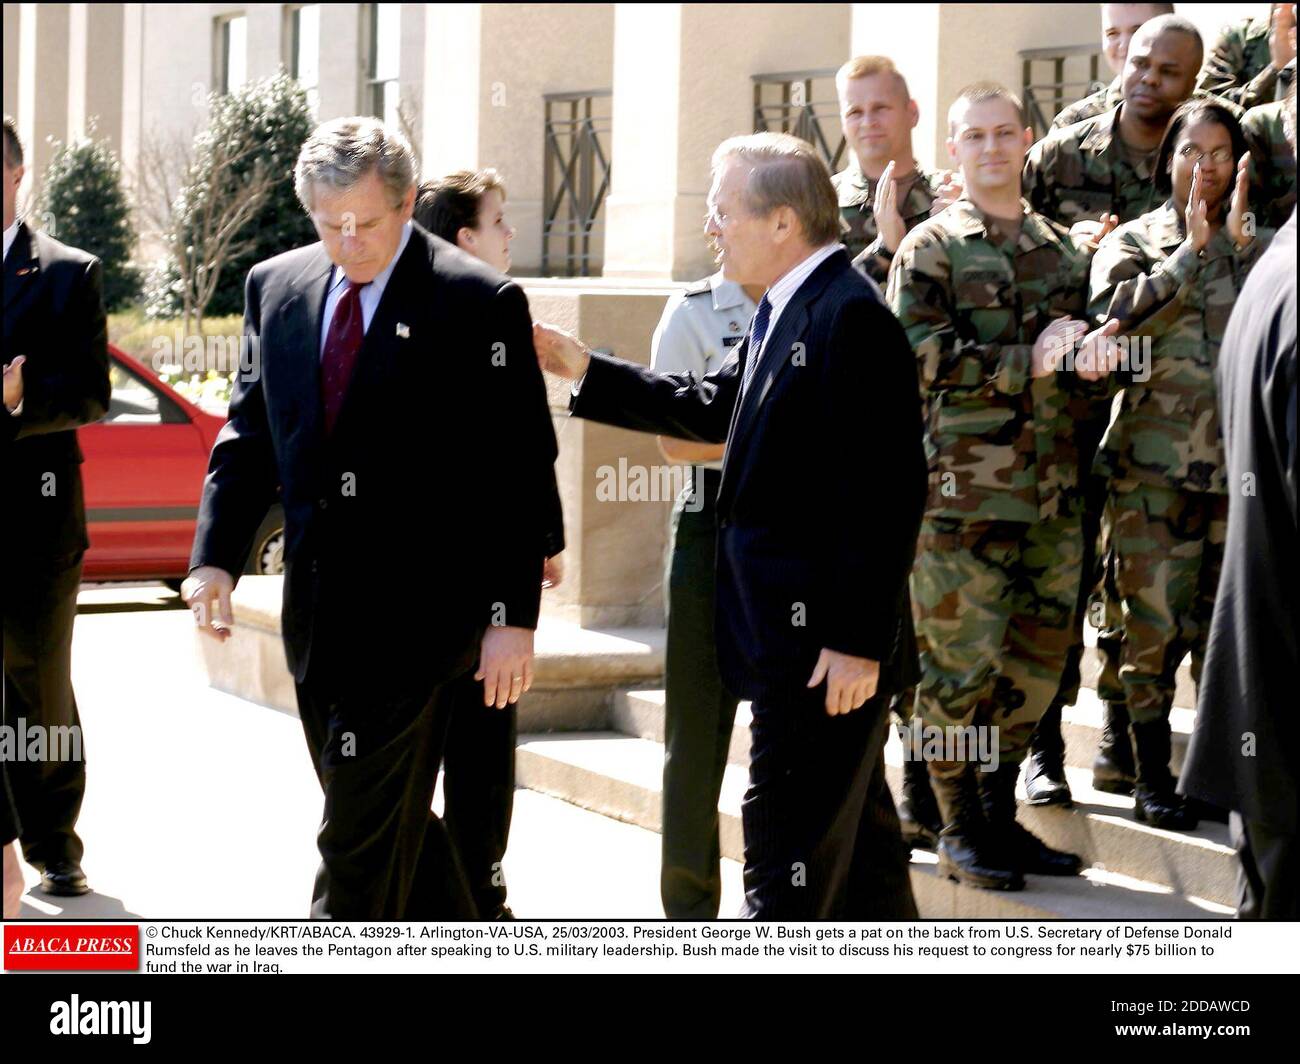 NO FILM, NO VIDEO, NO TV, NO DOCUMENTARY - © Chuck Kennedy/KRT/ABACA. 43929-1. Arlington-VA-USA, 25/03/2003. President George W. Bush gets a pat on the back from U.S. Secretary of Defense Donald Rumsfeld as he leaves the Pentagon after speaking to U.S. military leadership. Bush made the visit to d Stock Photo